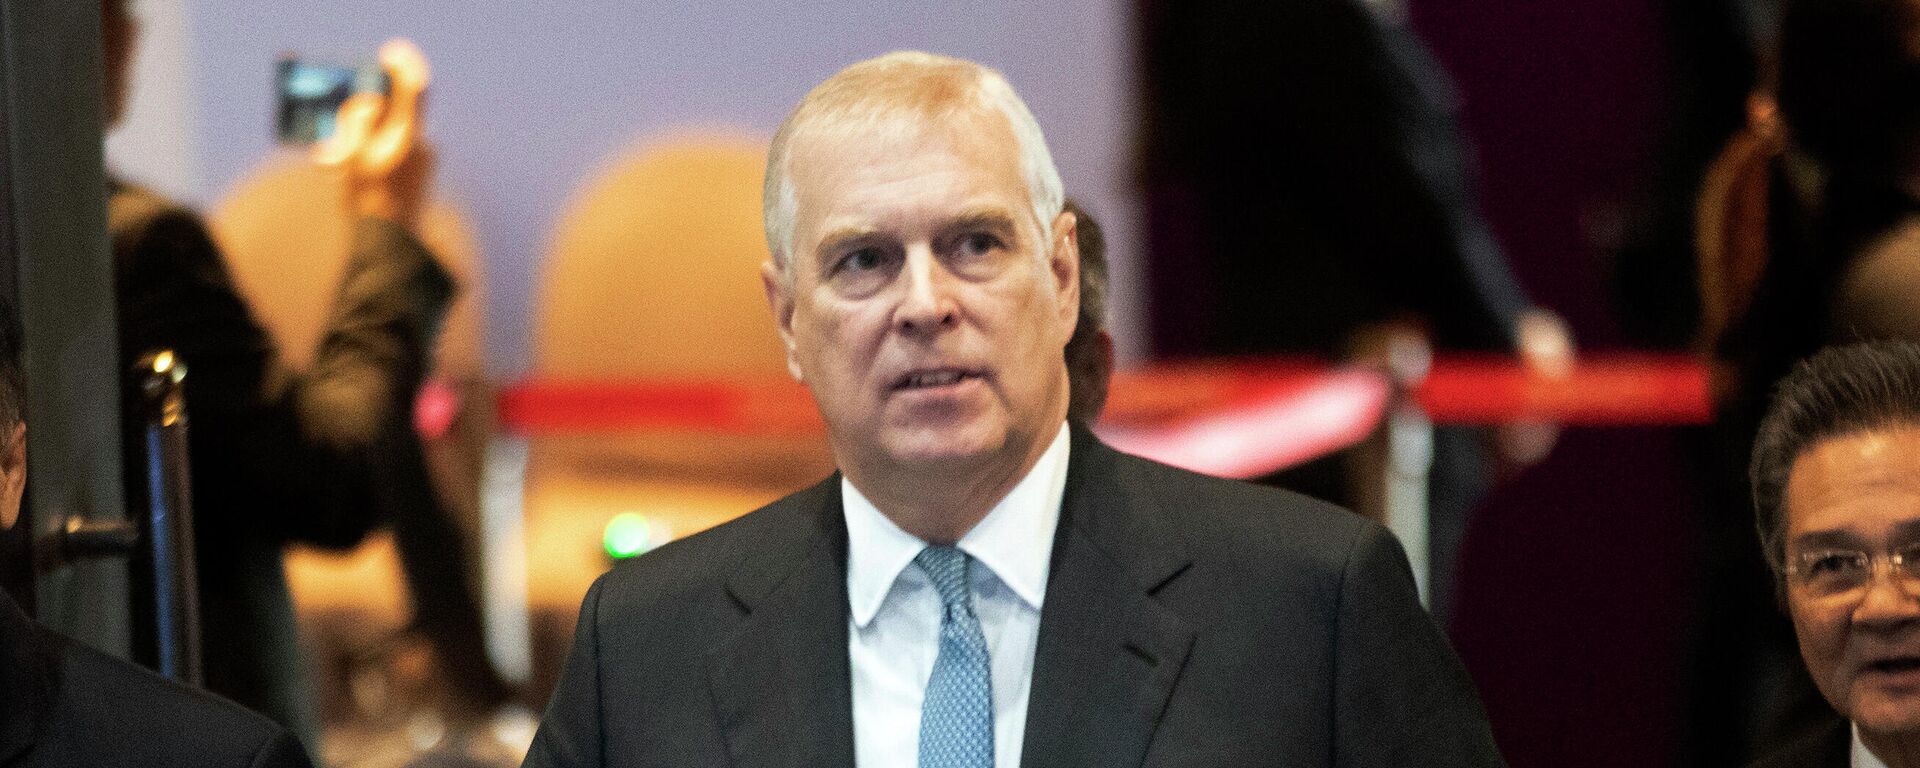 In this Nov. 3, 2019 file photo, Britain's Prince Andrew arrives at ASEAN Business and Investment Summit (ABIS) in Nonthaburi, Thailand. Prince Andrew wasn’t on trial in the Ghislaine Maxwell sex trafficking case, but her conviction is bad news for the man who is ninth in line to the British throne. (AP Photo/Sakchai Lalit, file) - Sputnik International, 1920, 21.02.2022